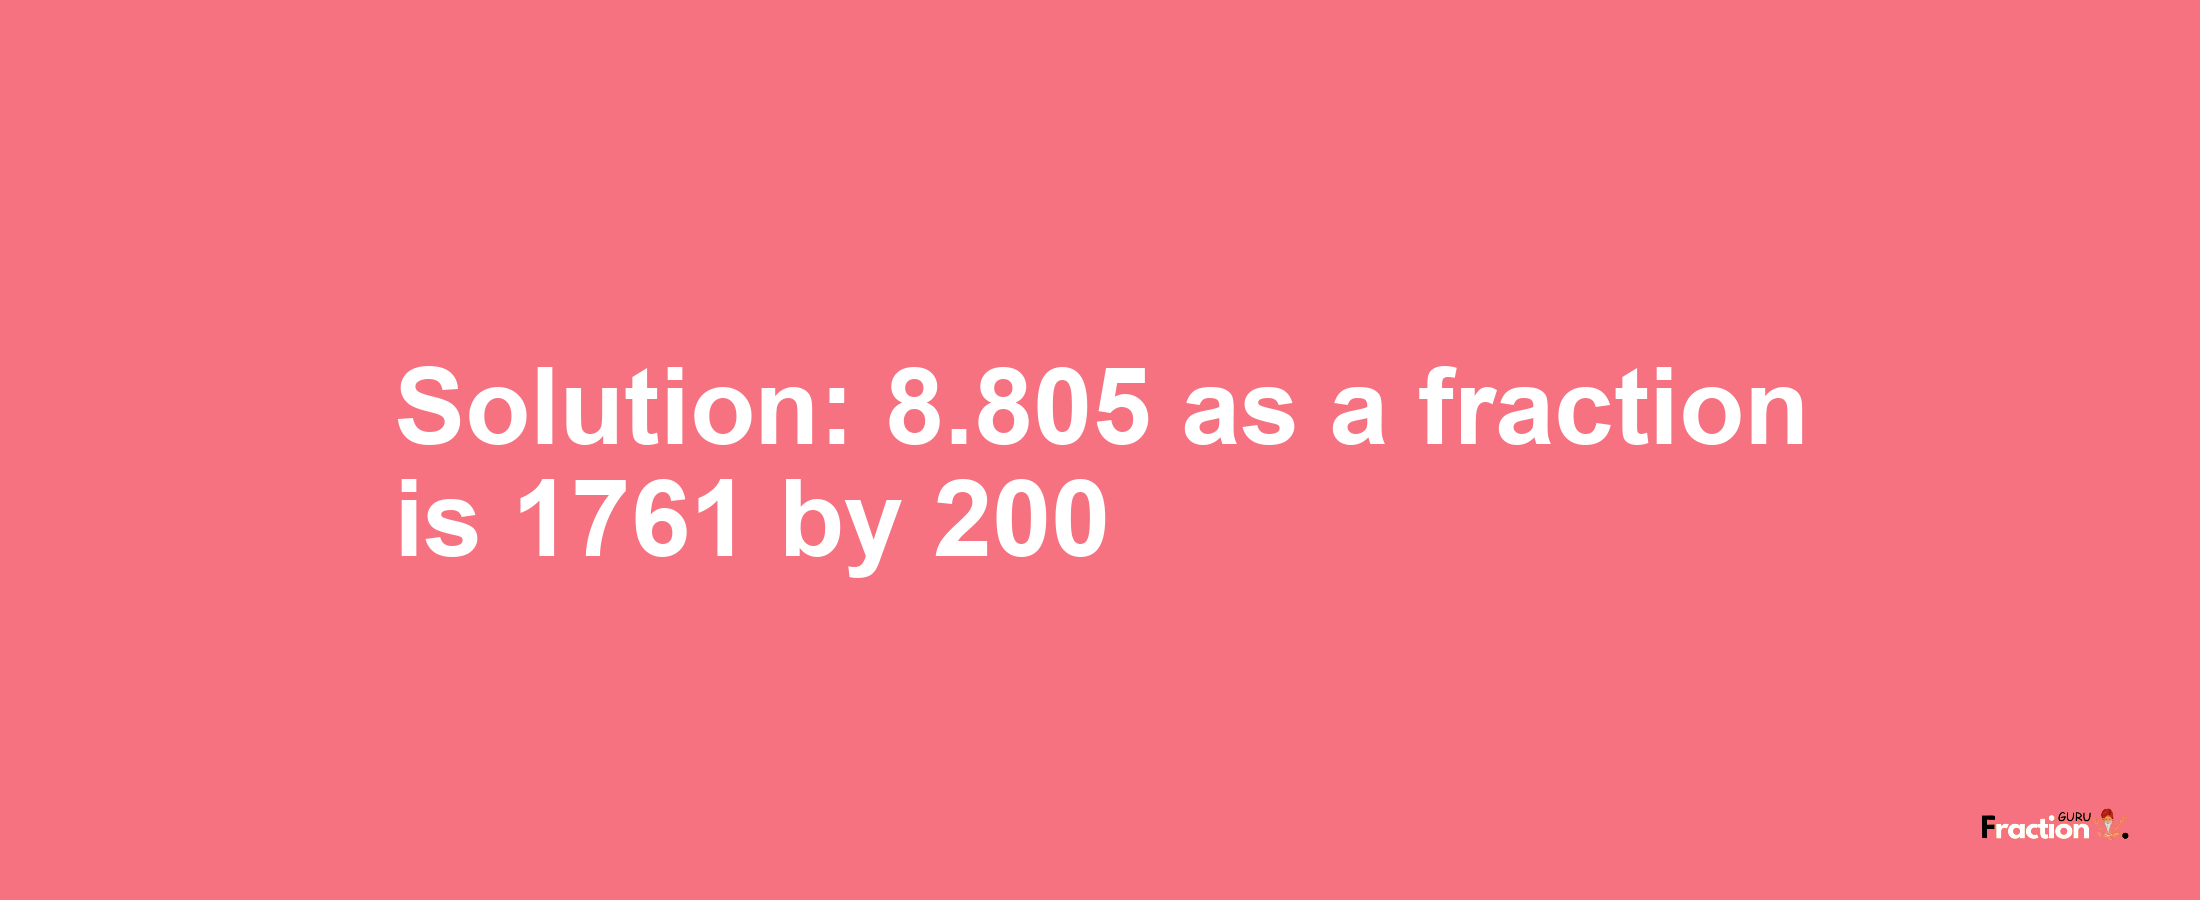 Solution:8.805 as a fraction is 1761/200